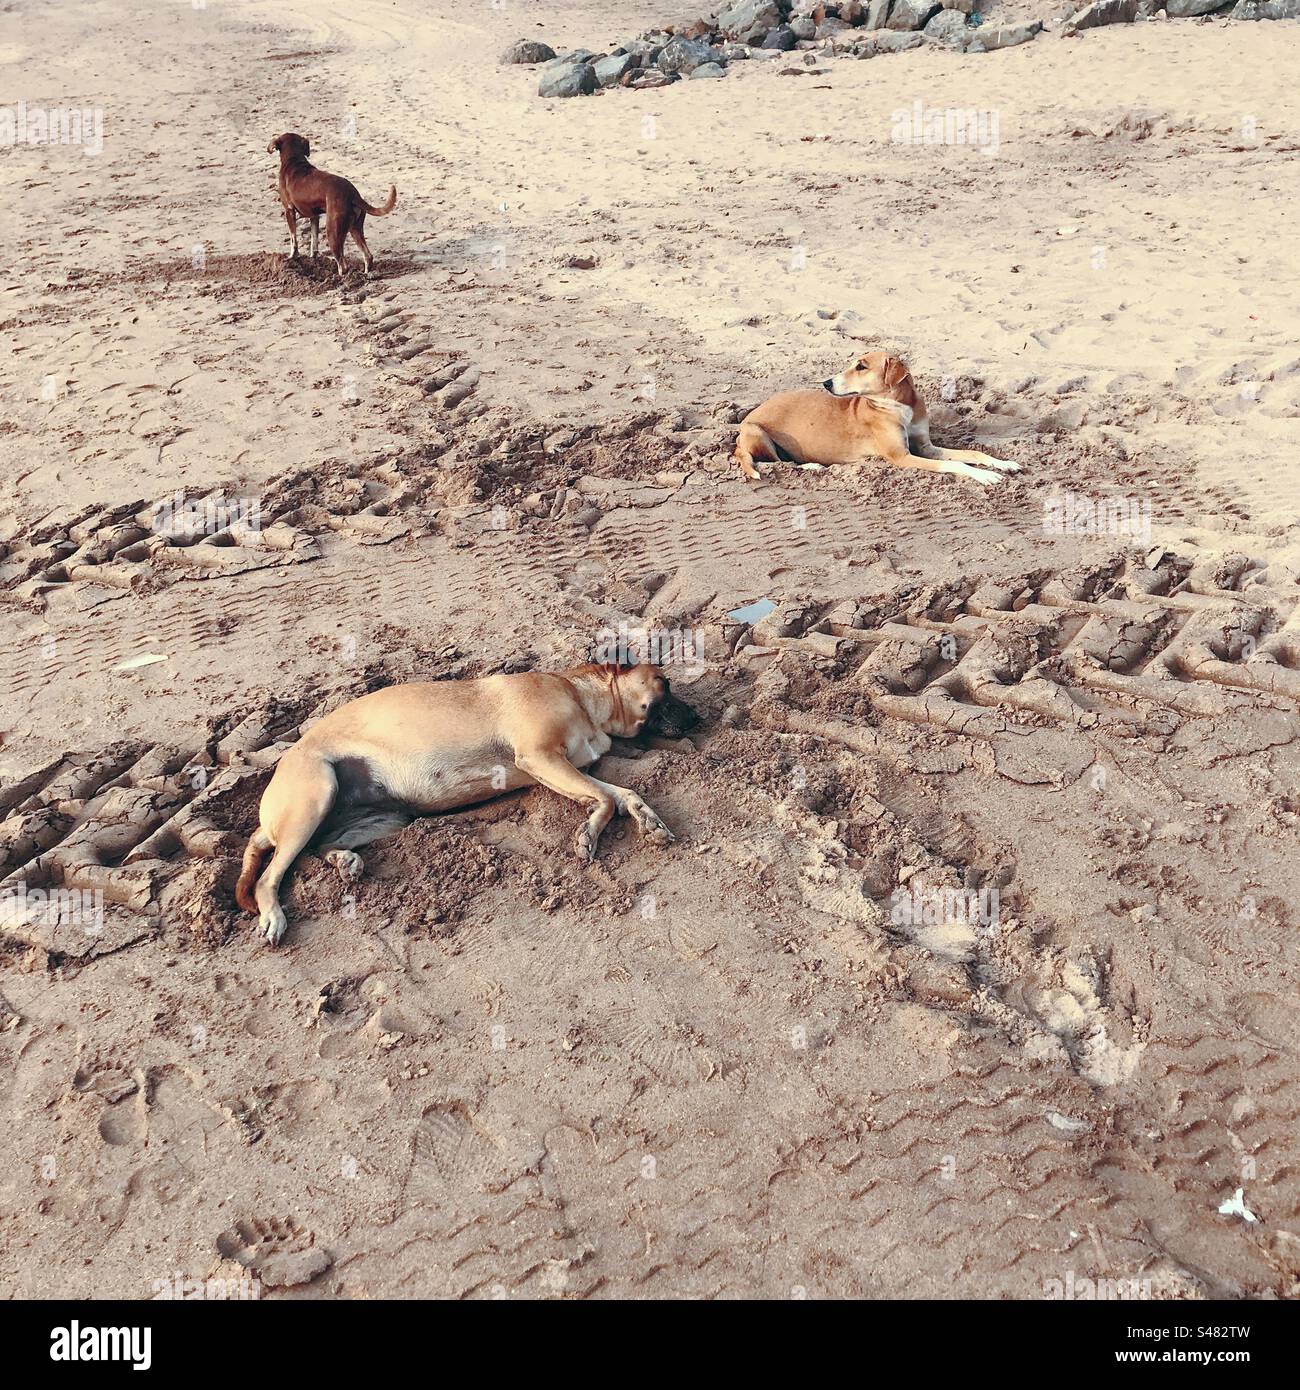 Stray dogs on a beach with tyre marks in the sand Stock Photo